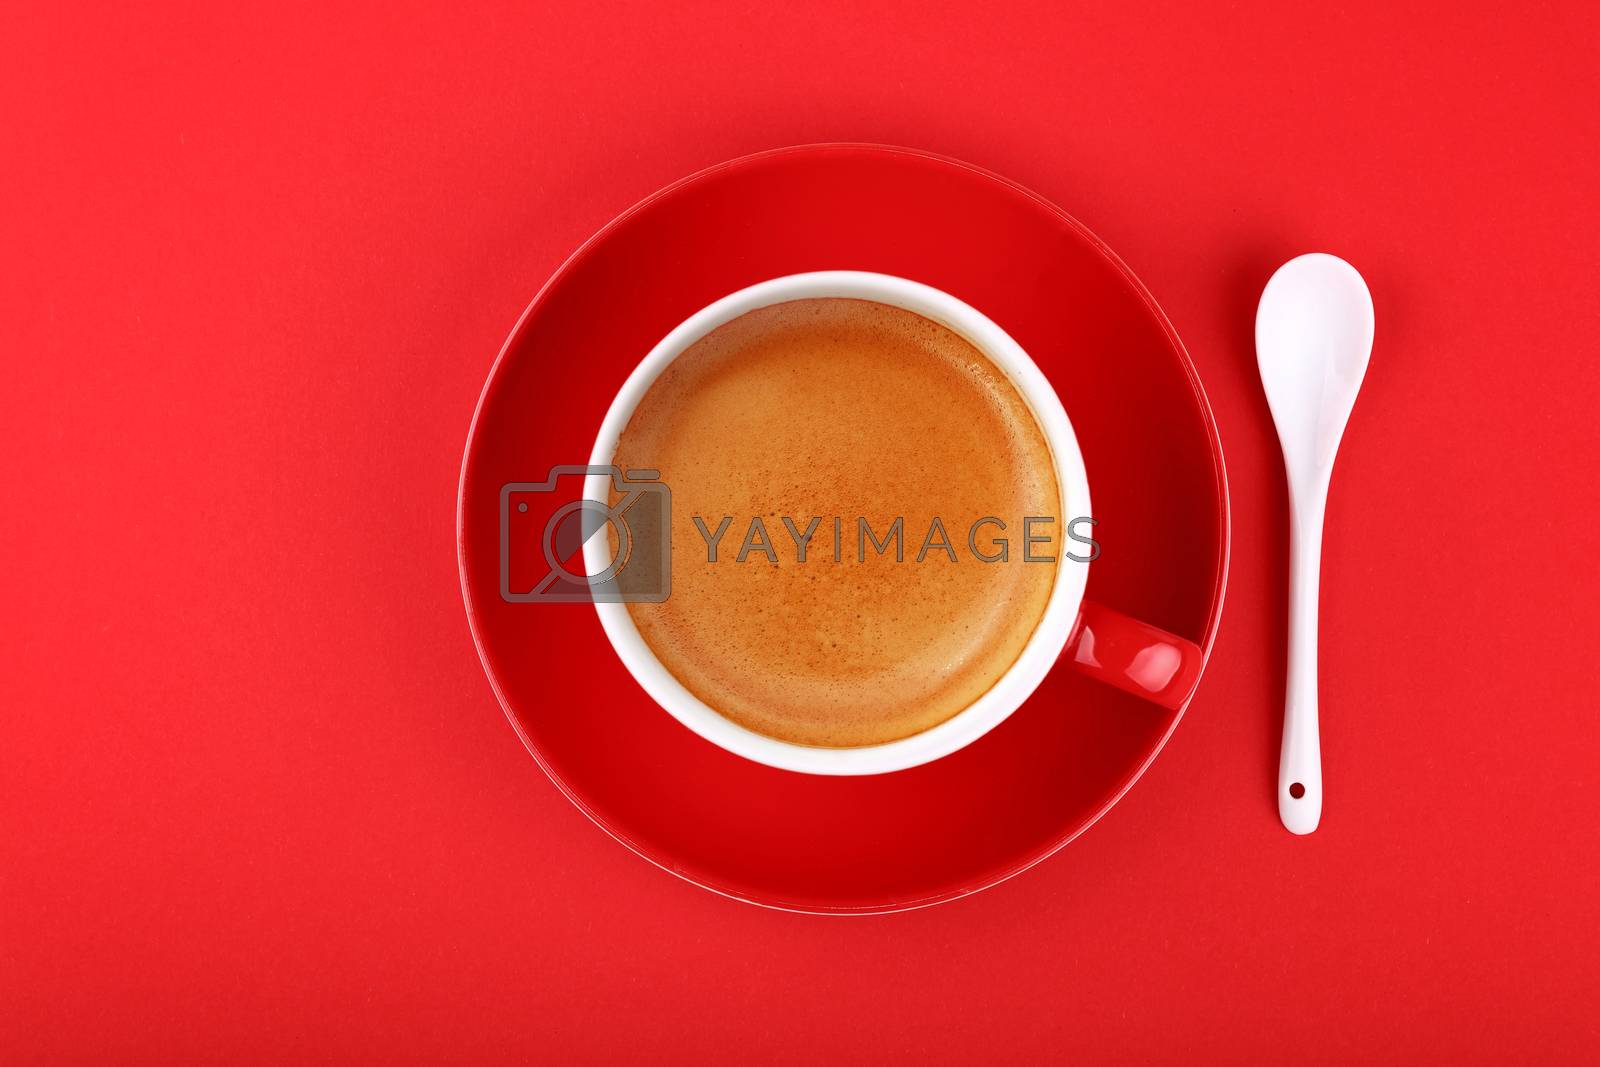 Royalty free image of Full cup of espresso coffee on red paper by BreakingTheWalls